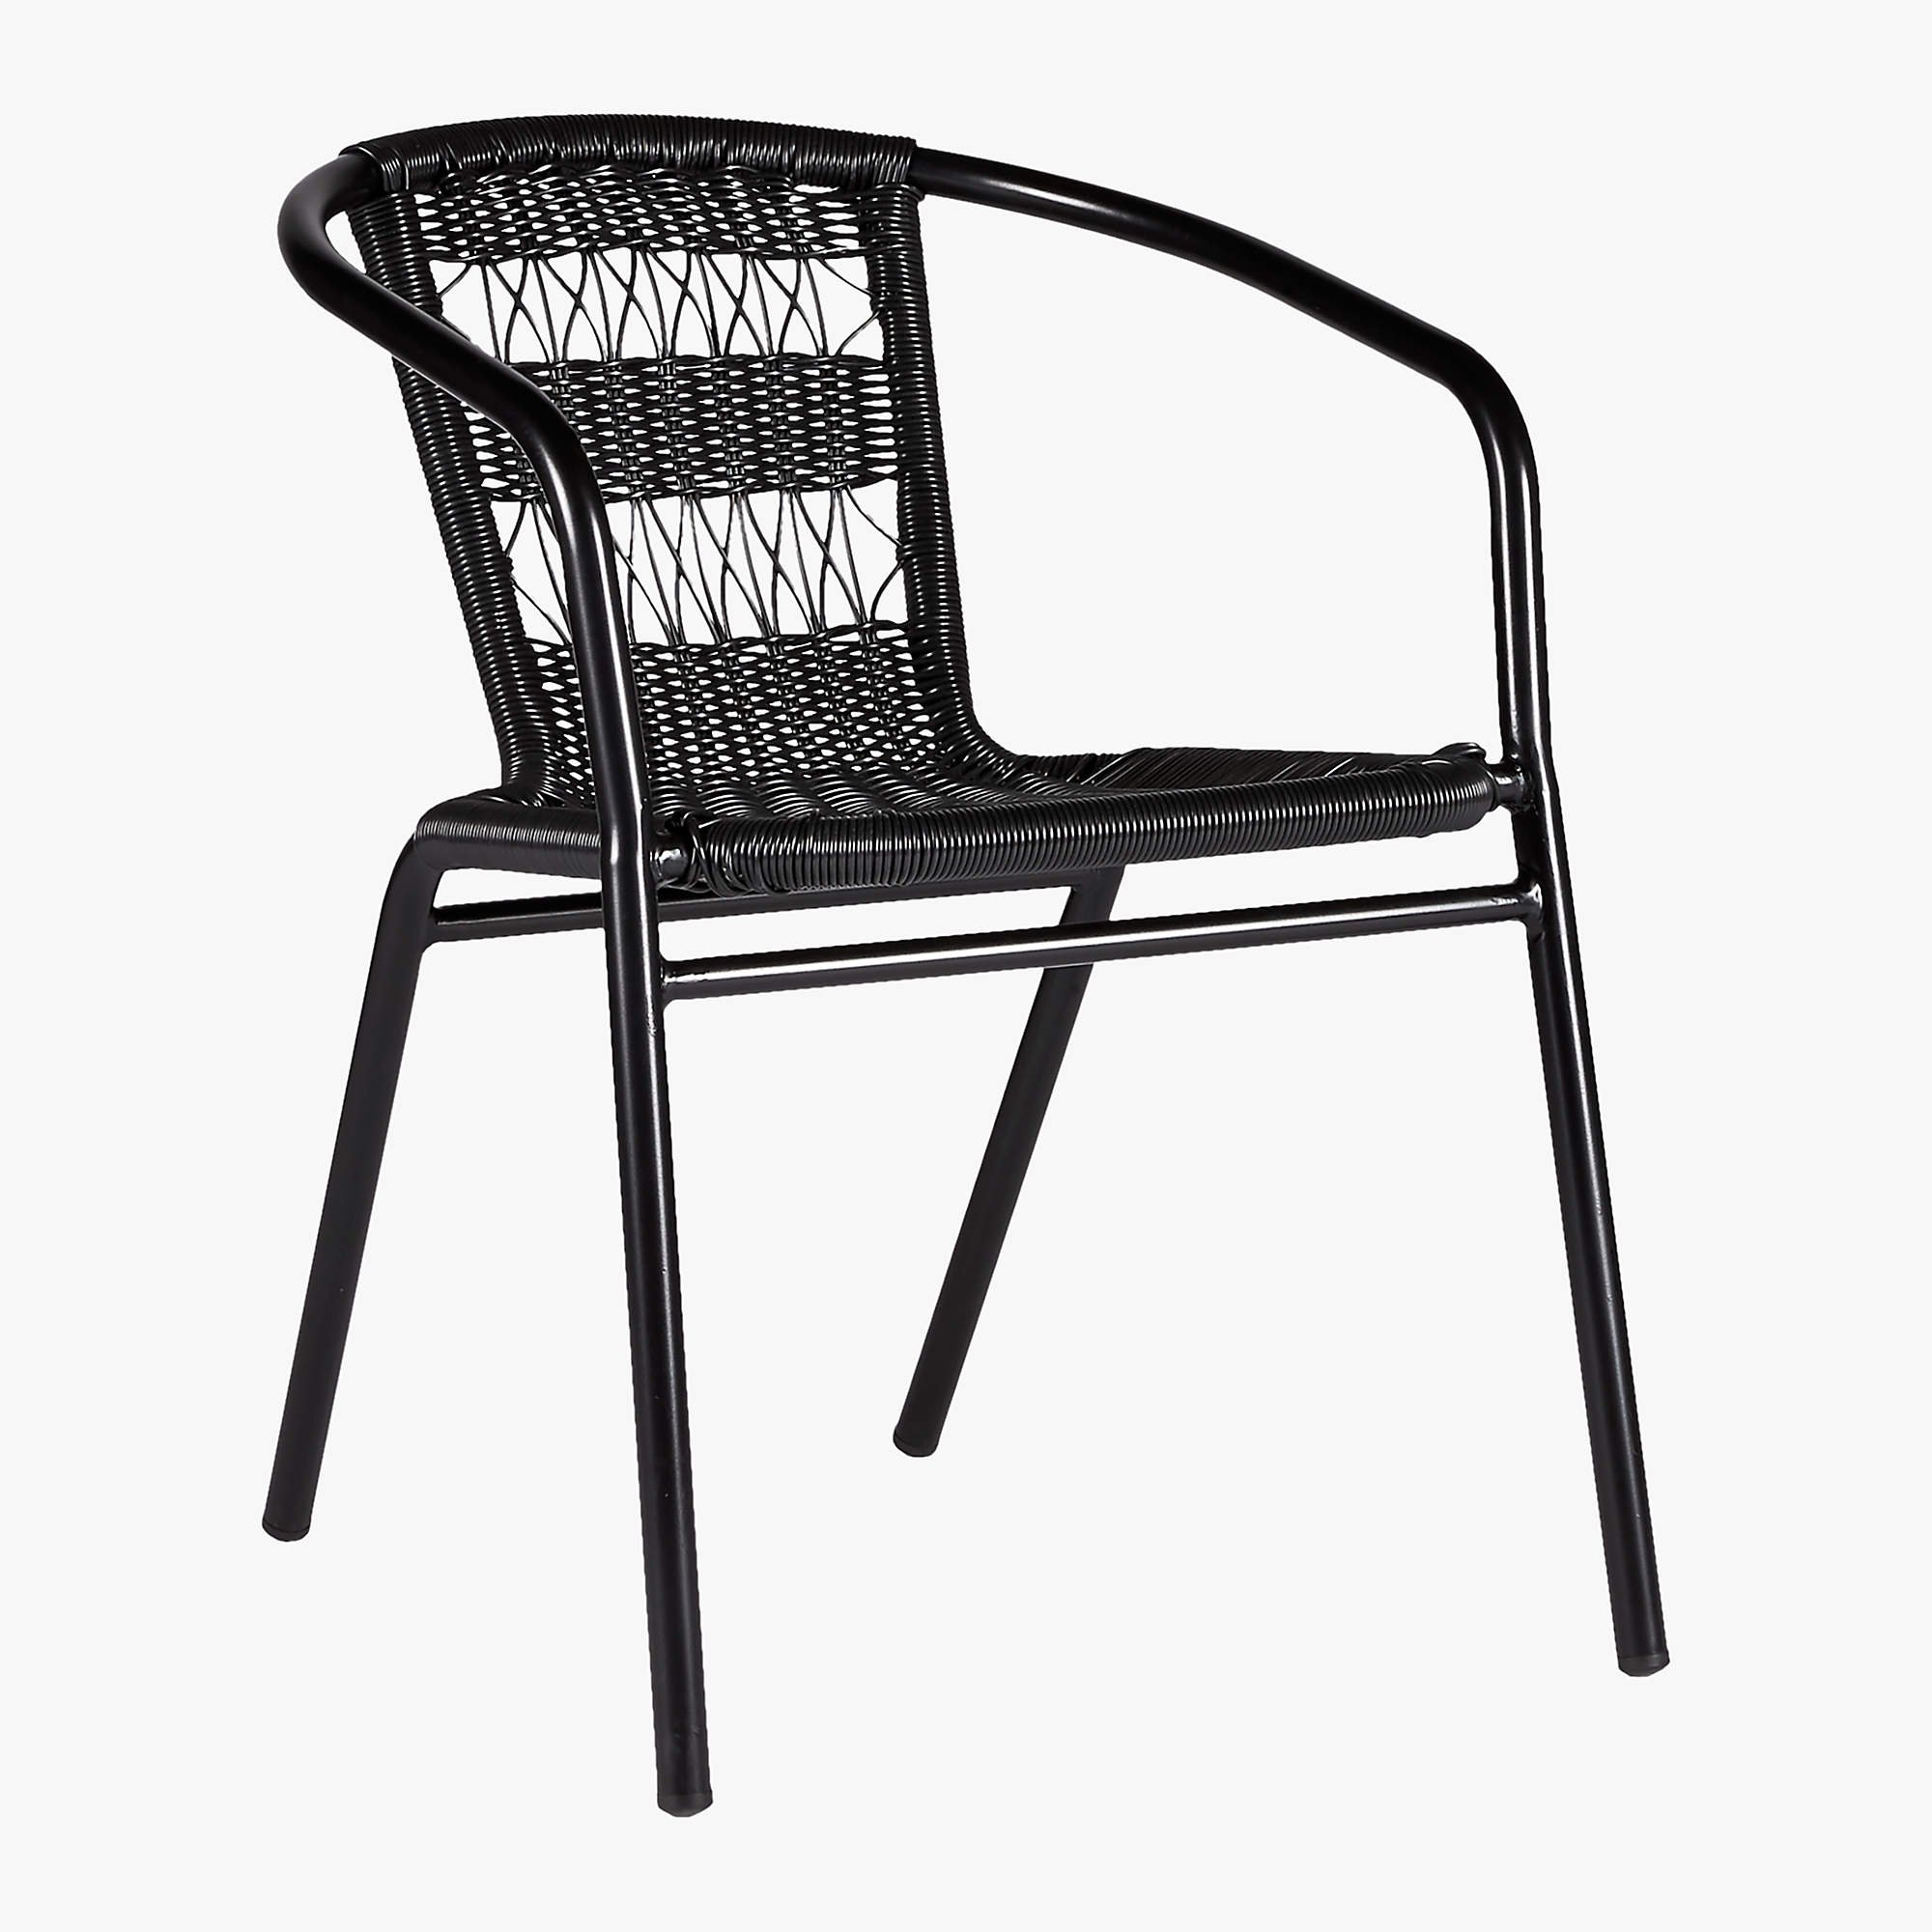 CB2 Outdoor Chair